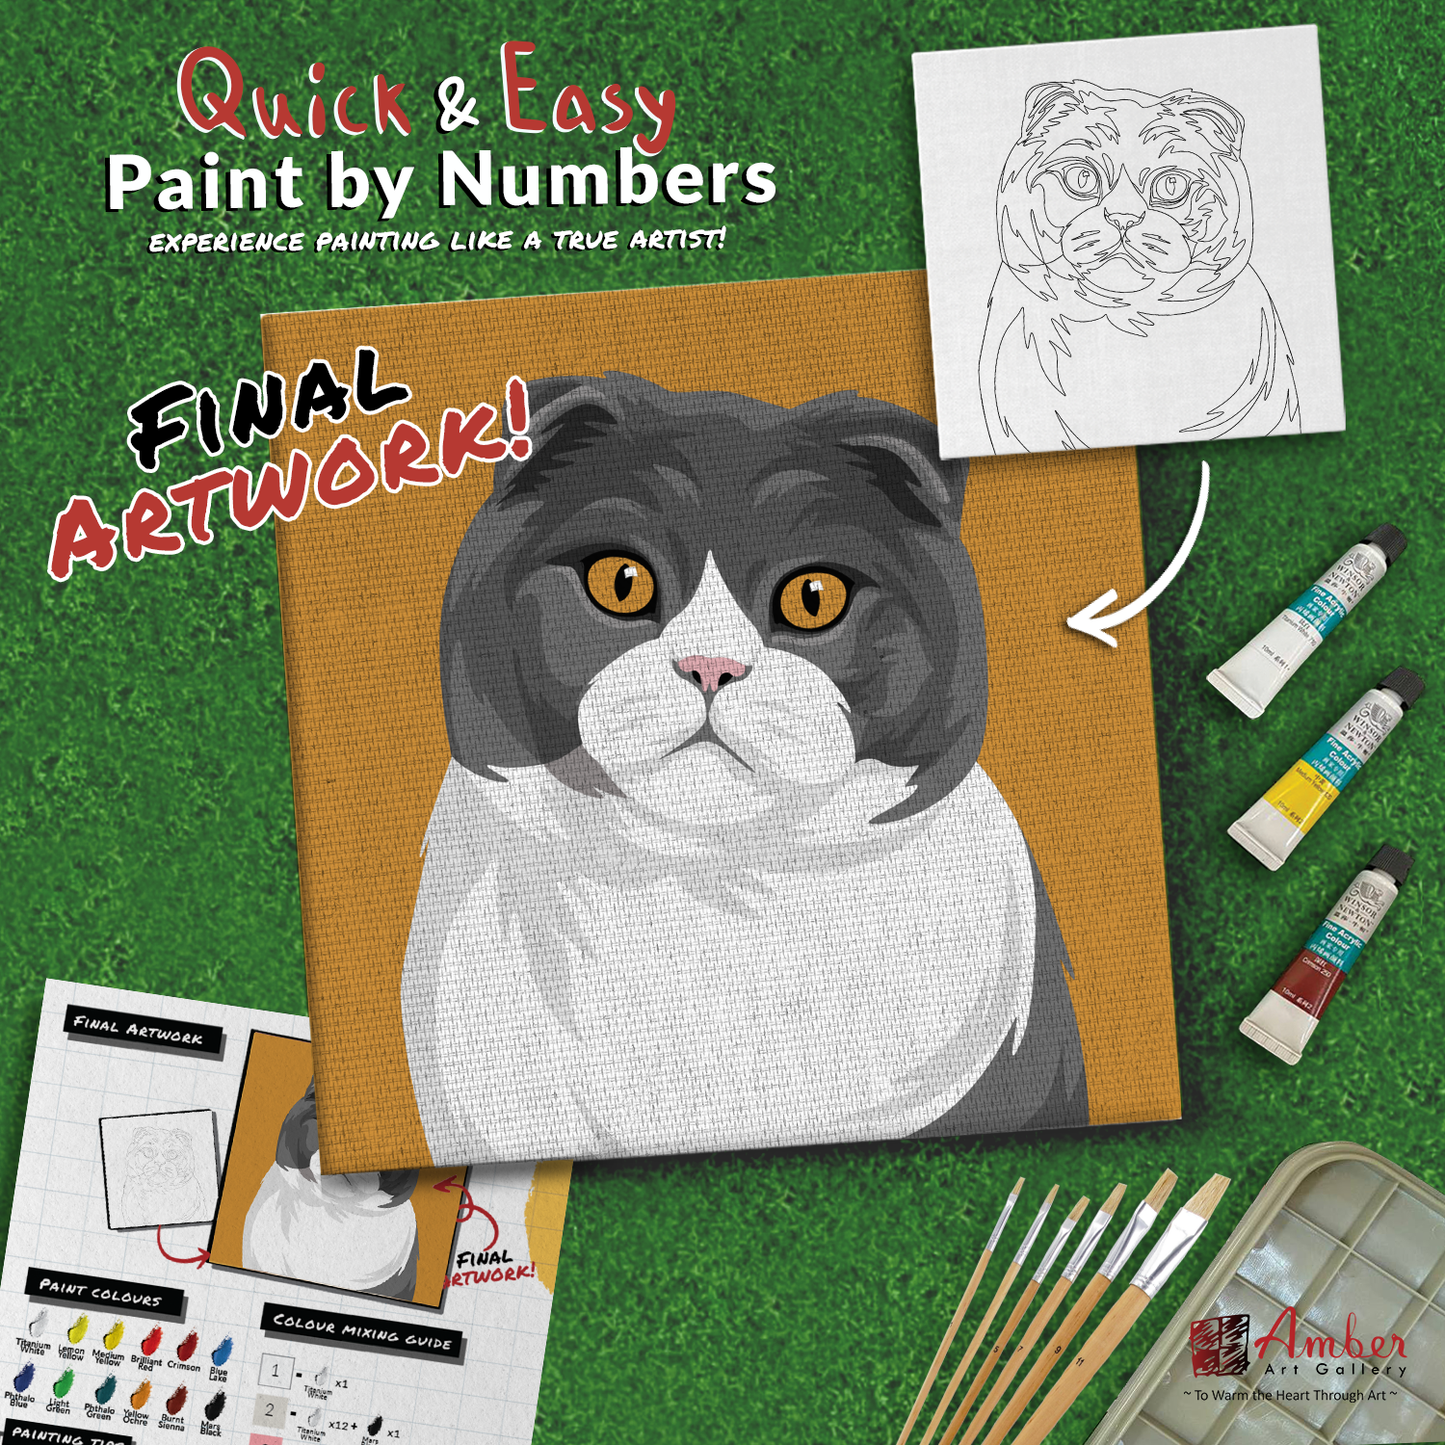 paint-by-numbers-painting-kit-cat-scottish-fold